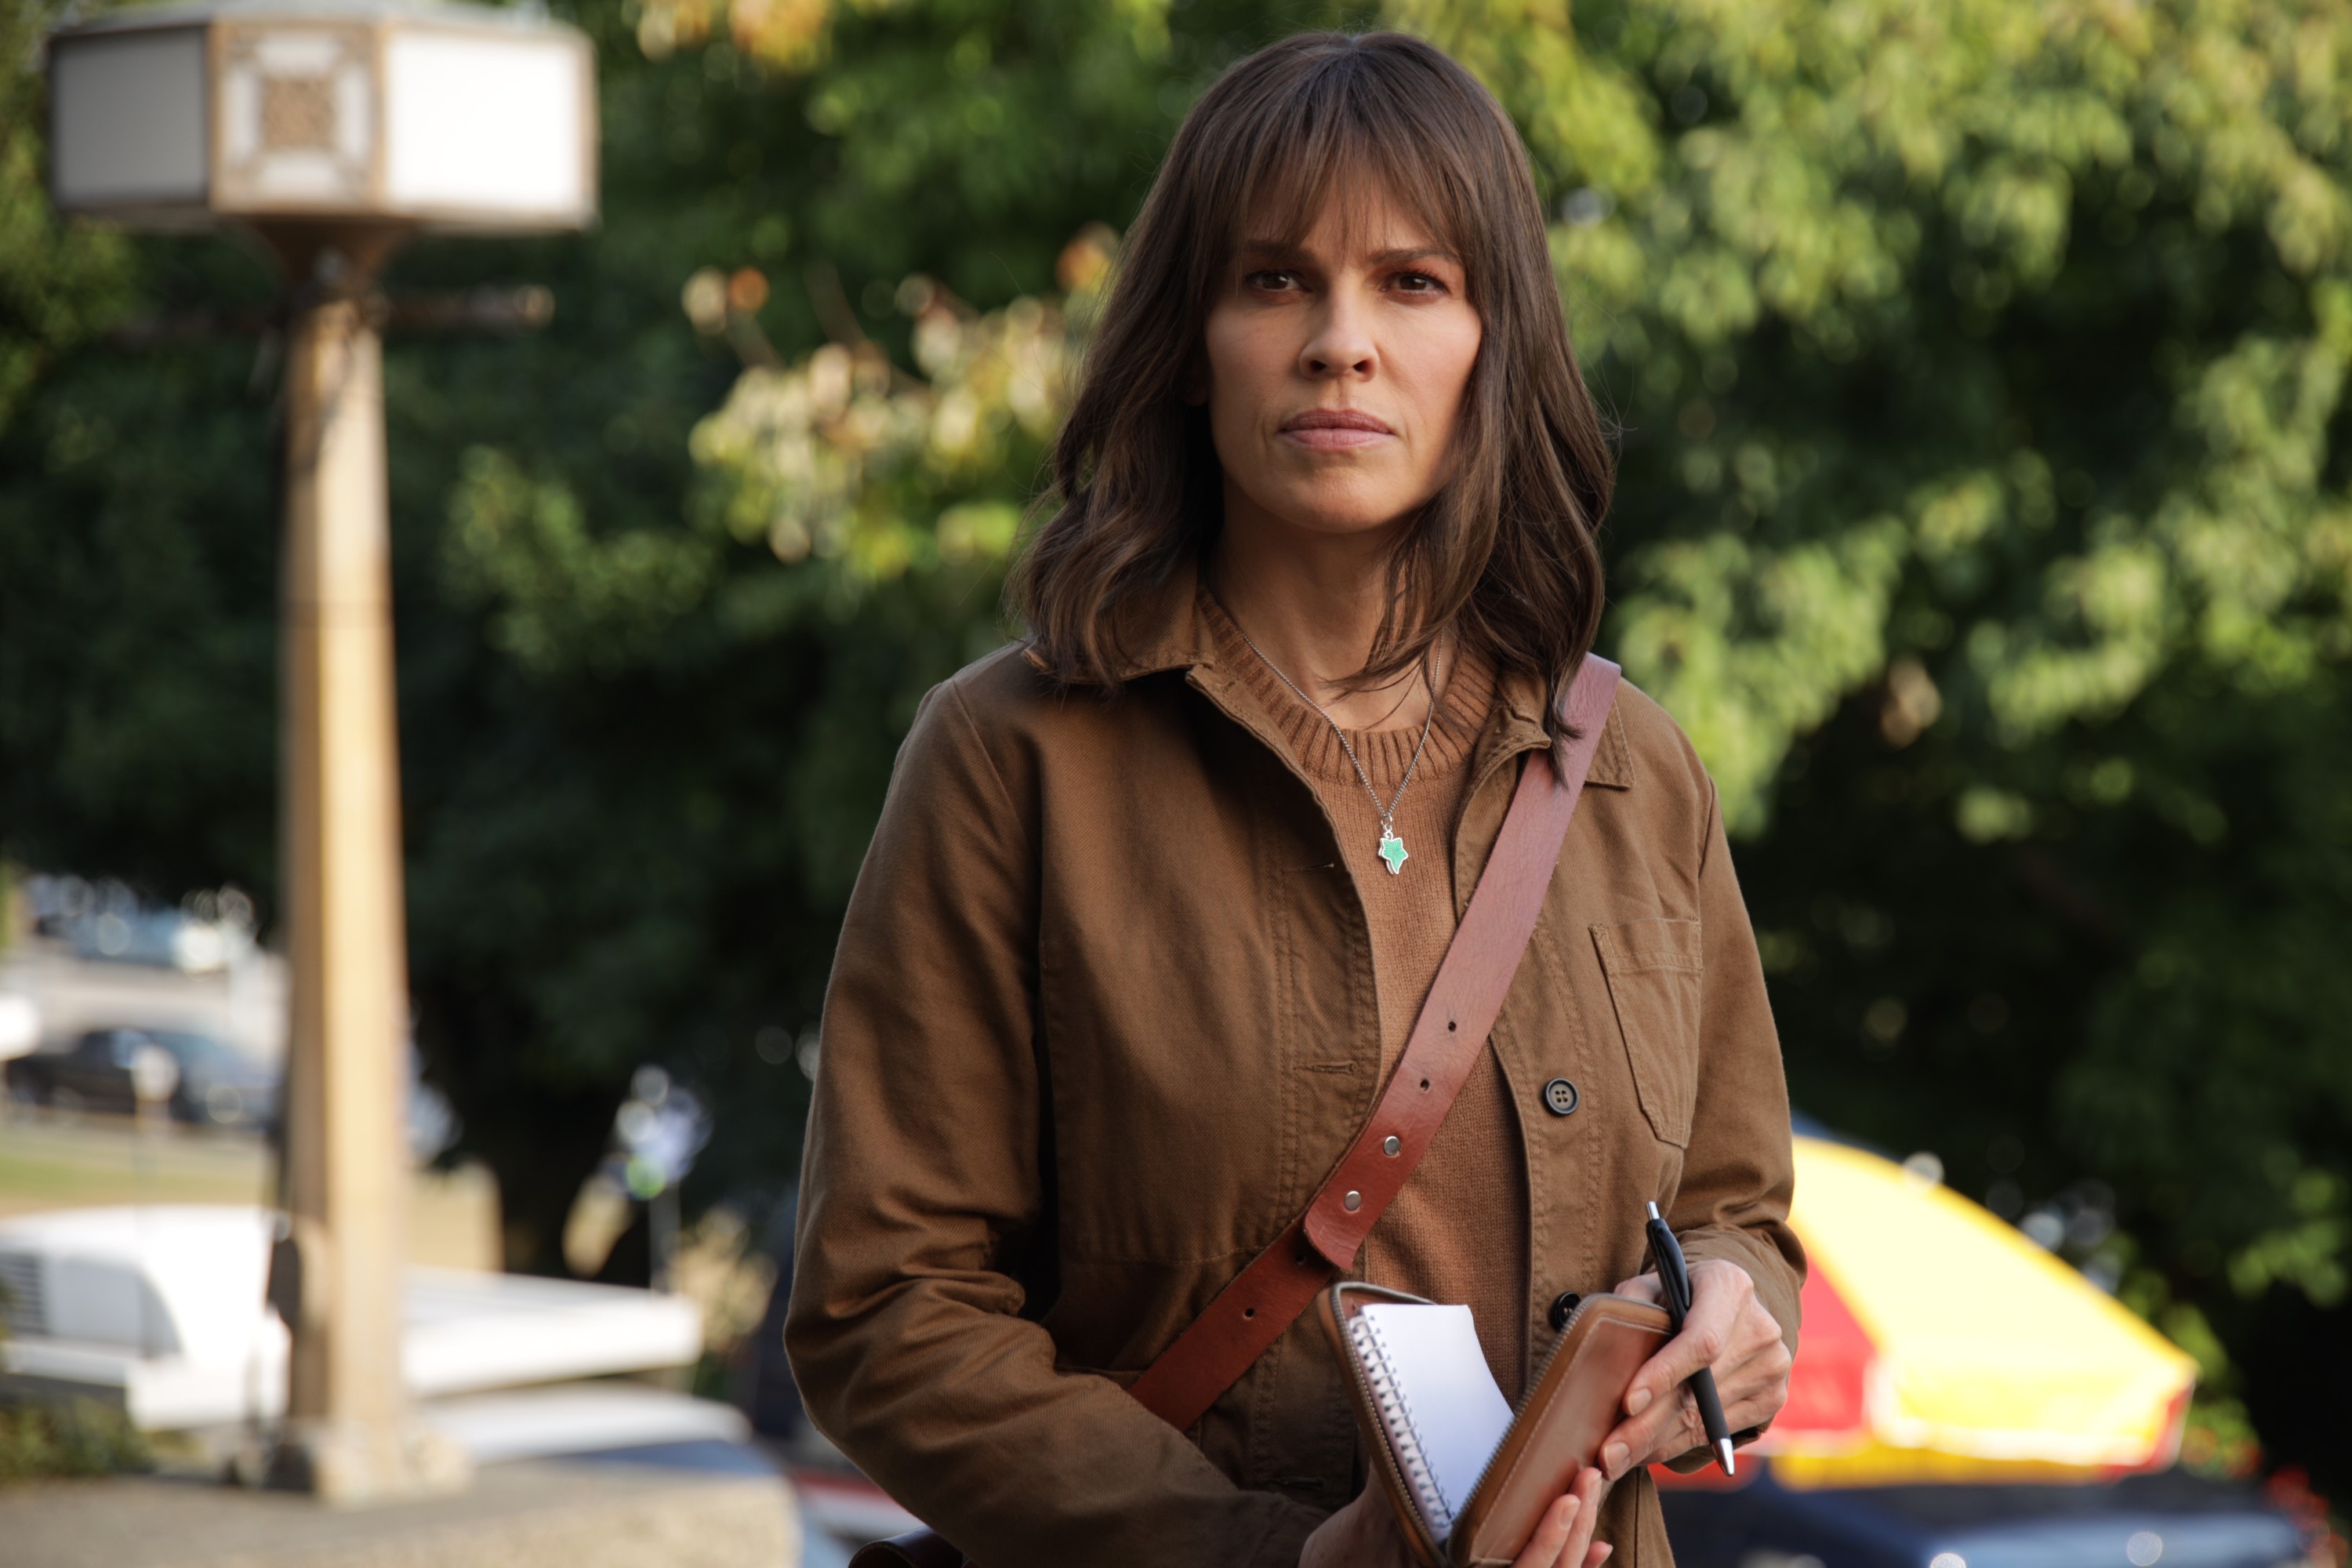 Hilary Swank, in character as Eileen Fitzgerald in 'Alaska Daily' on ABC, wears a brown coat over a brown sweater and holds a notepad.